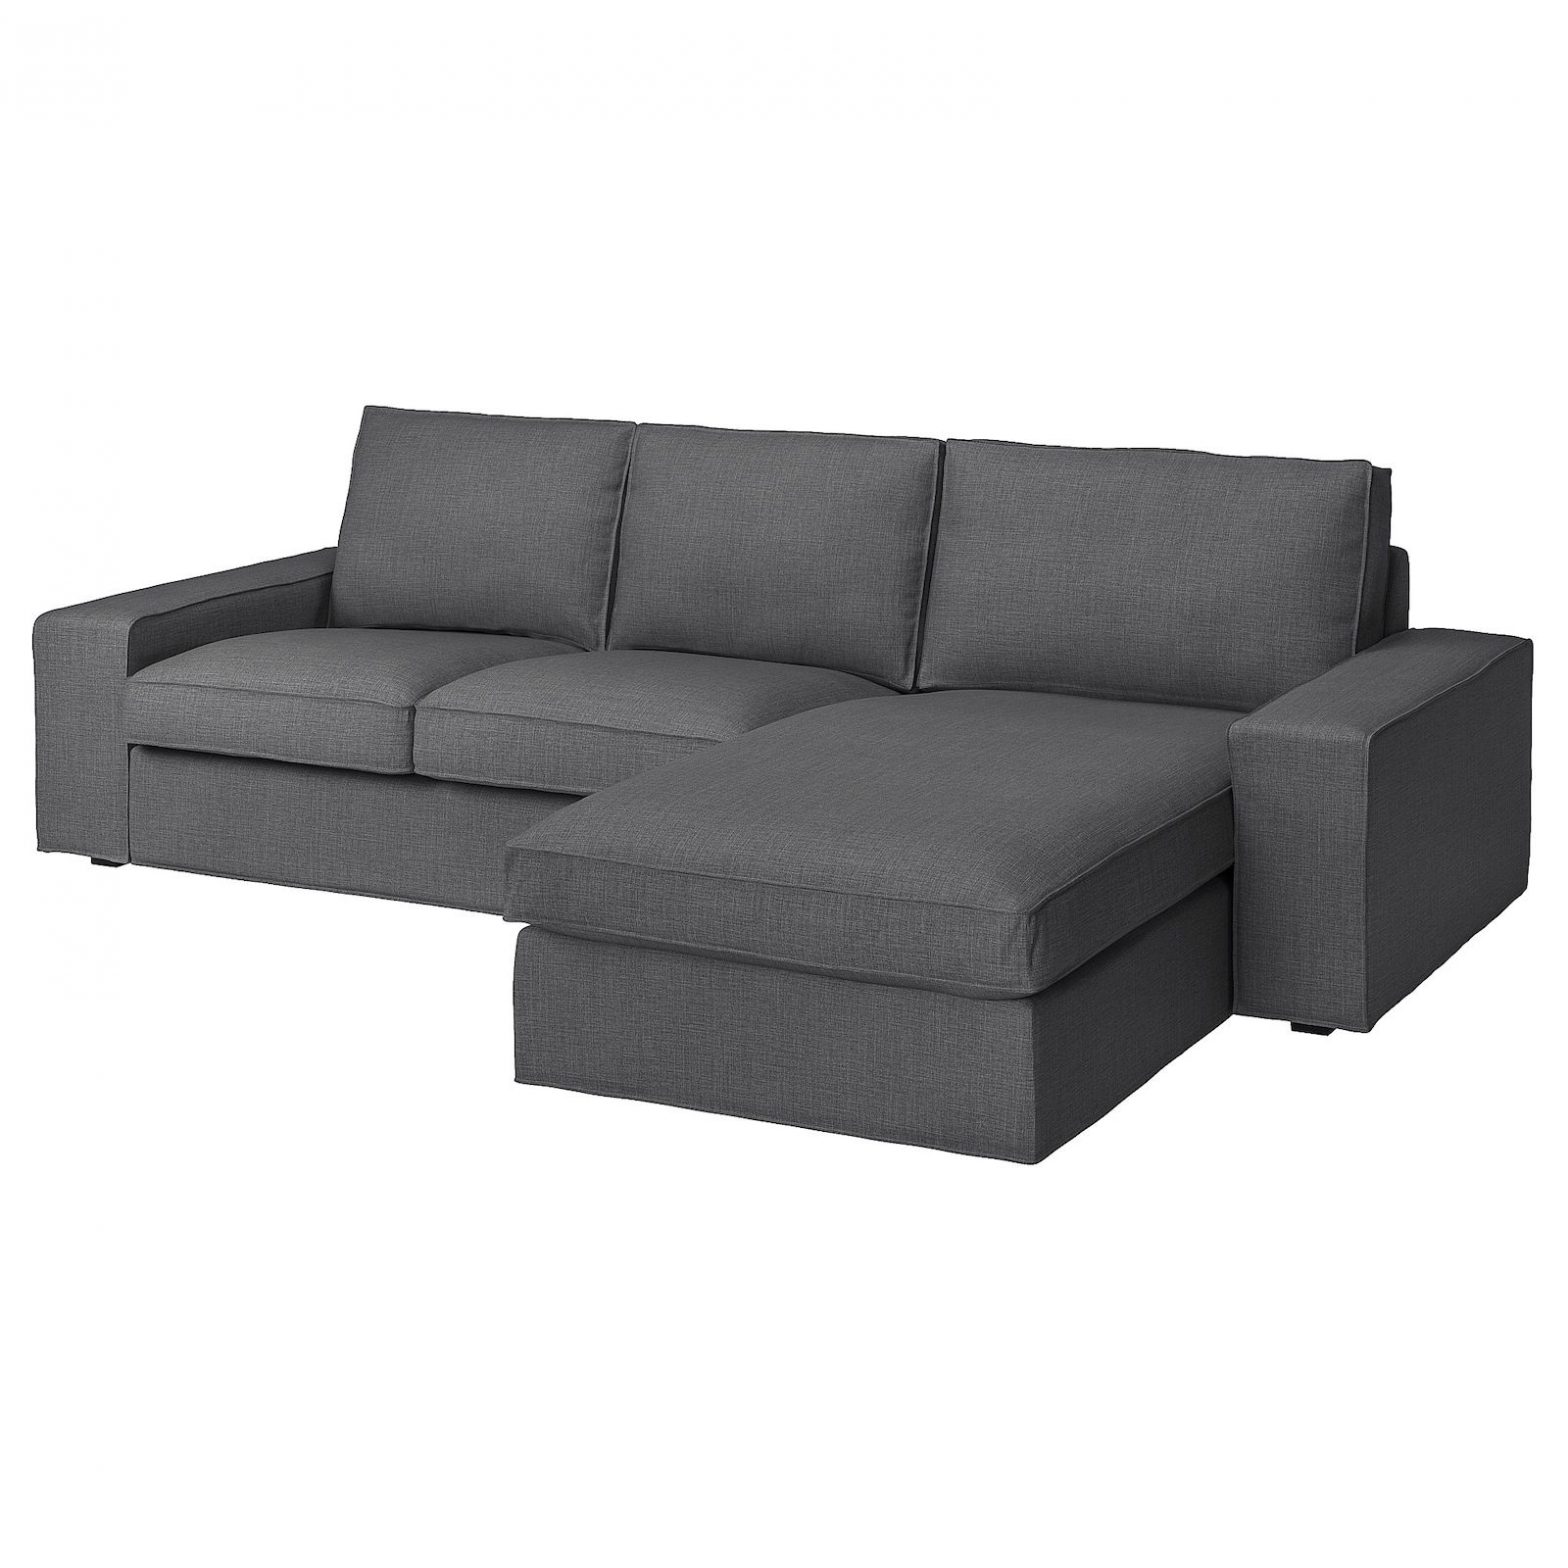 IKEA KIVIK Seating Series Footstool with storage Chaise lounge Loveseat Sofa User Guide